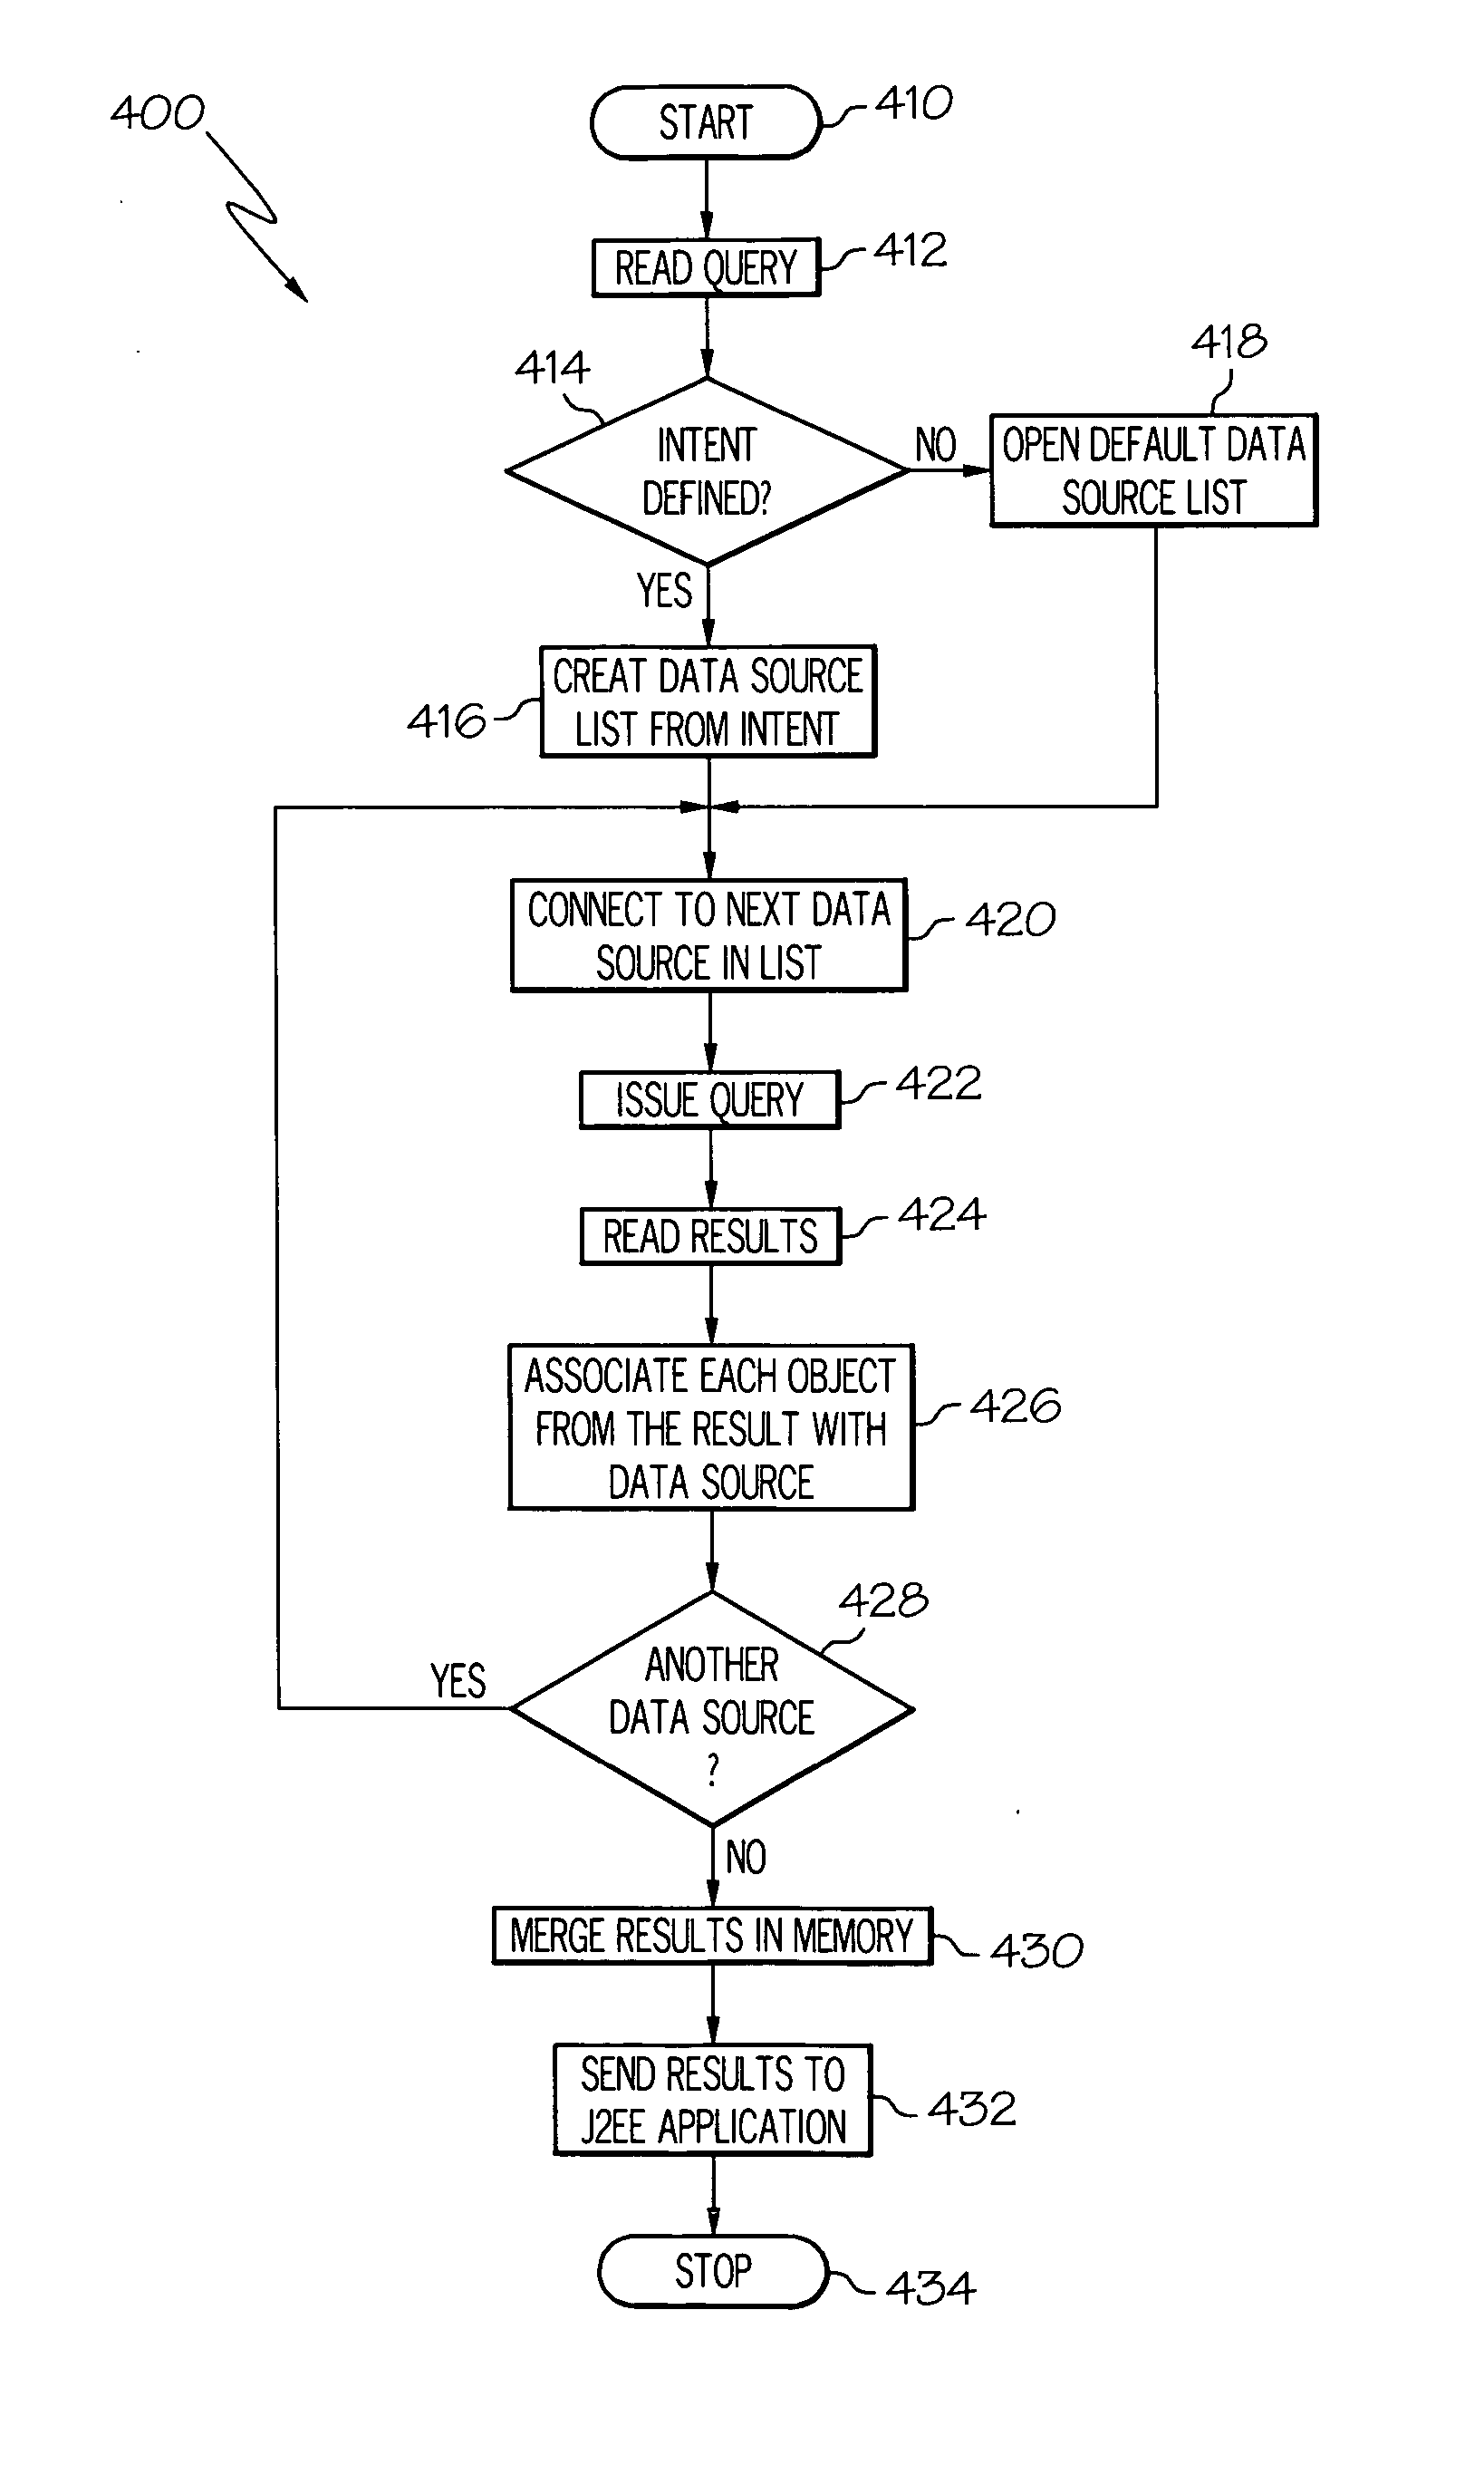 Method to support multiple data sources connecting to a persistent object